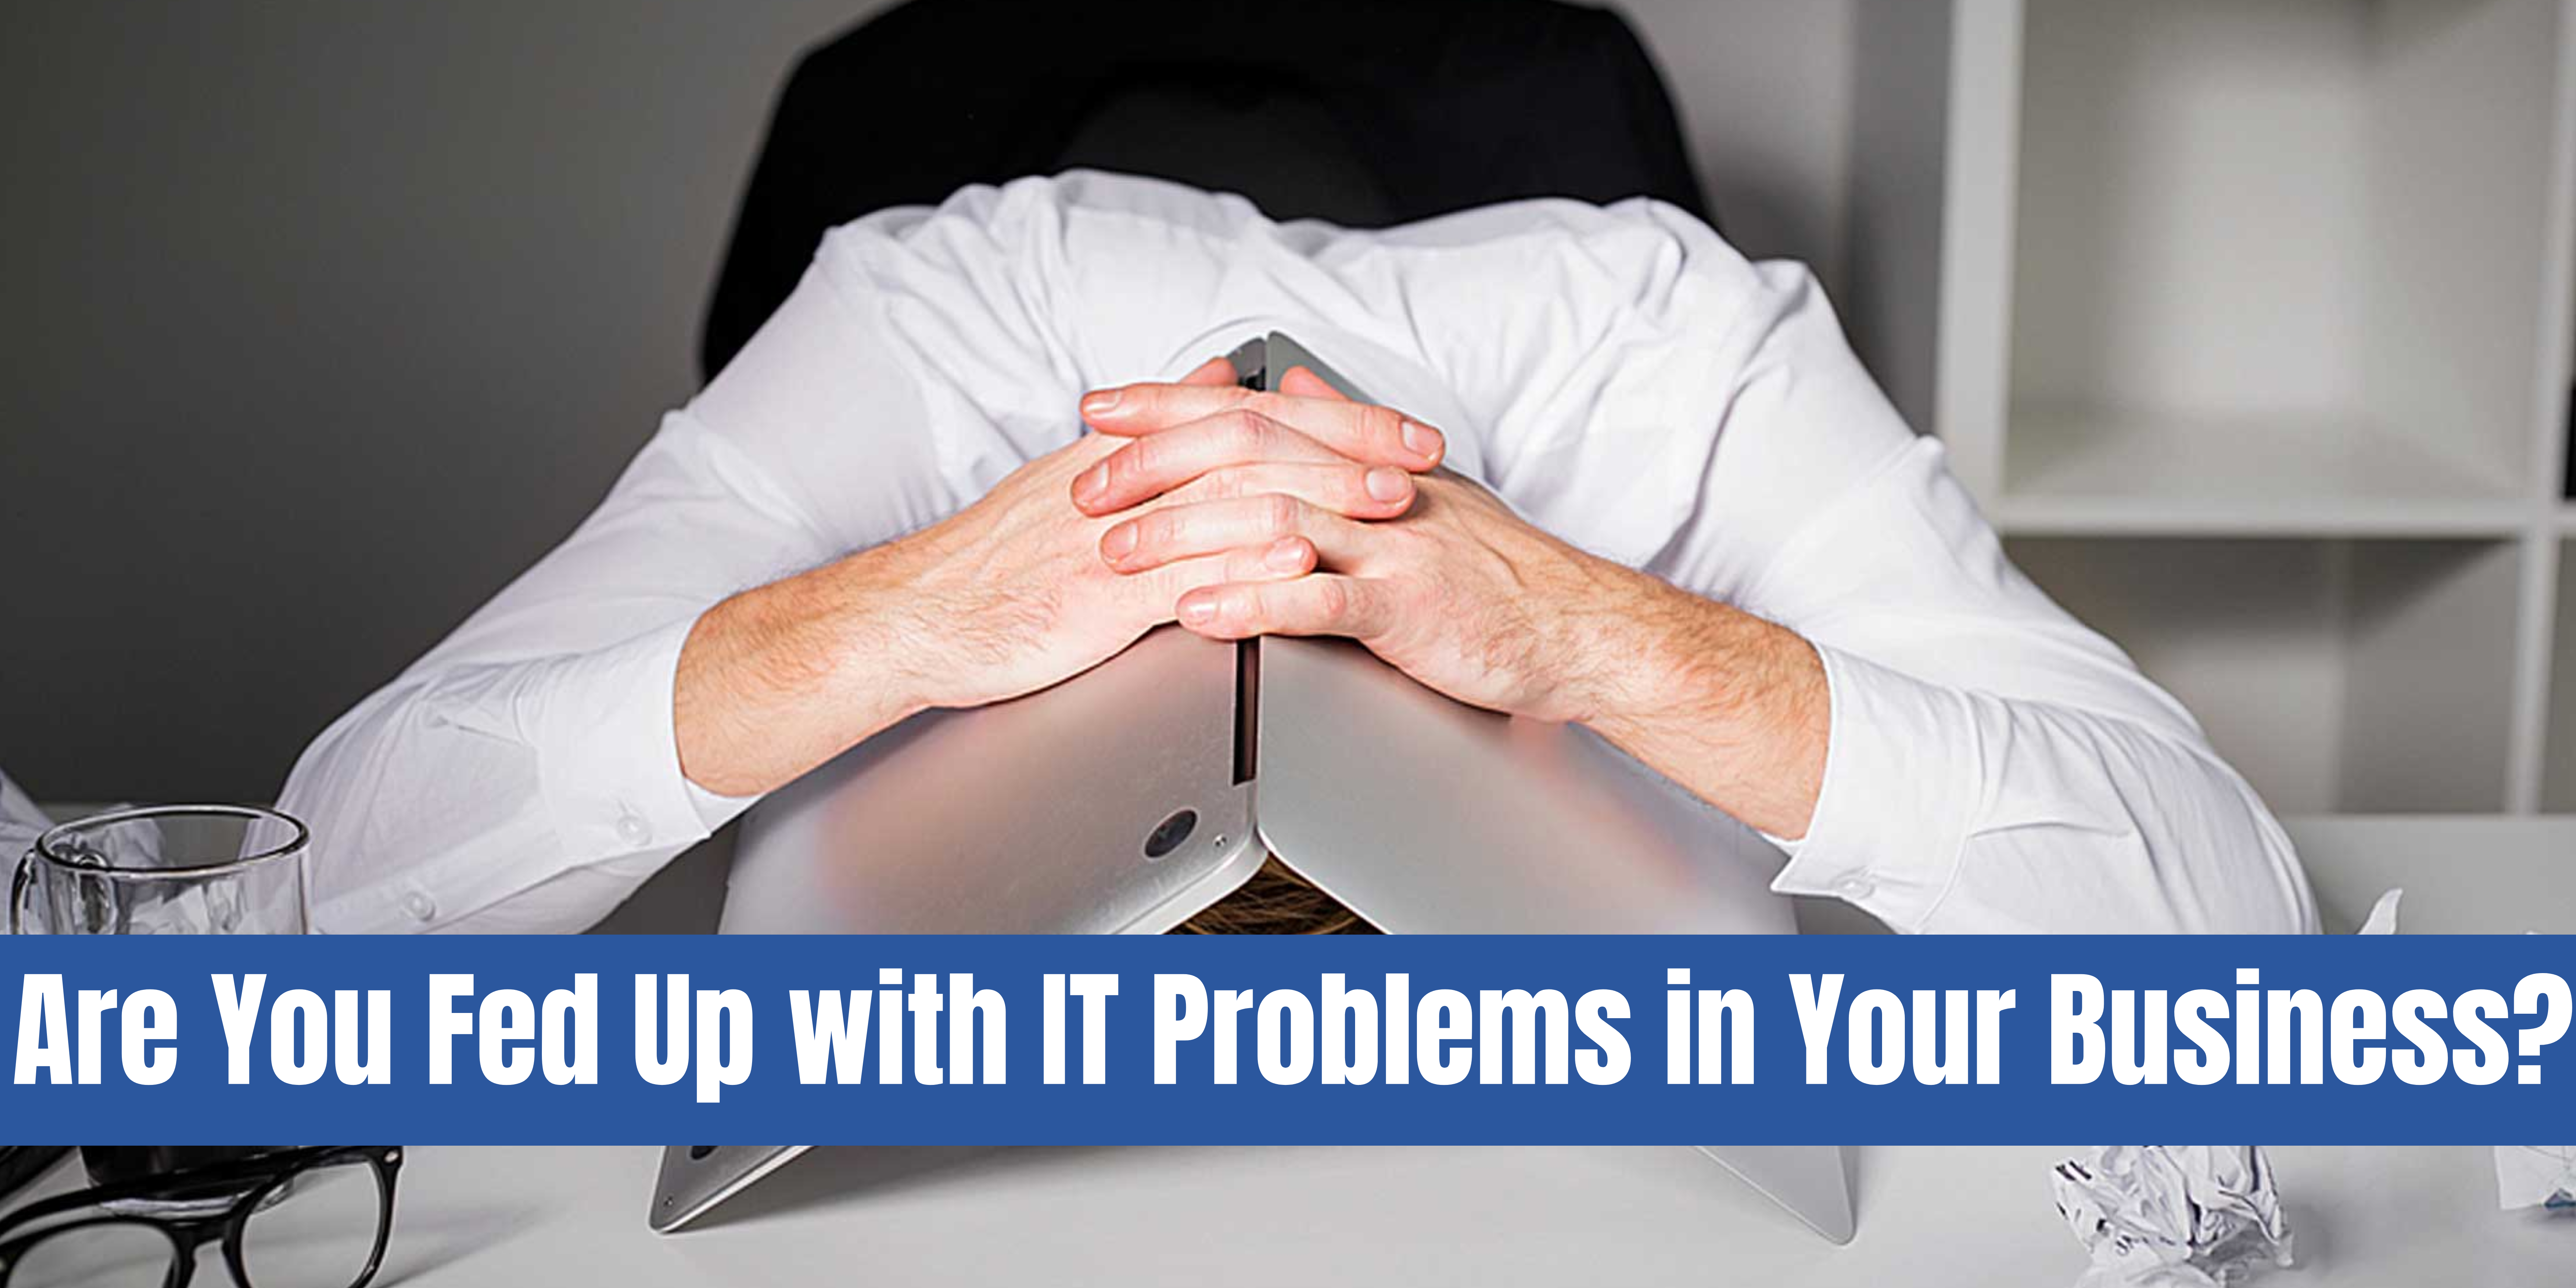 You are currently viewing The 5 Most Common IT Problems That Businesses Face and How to Fix Them